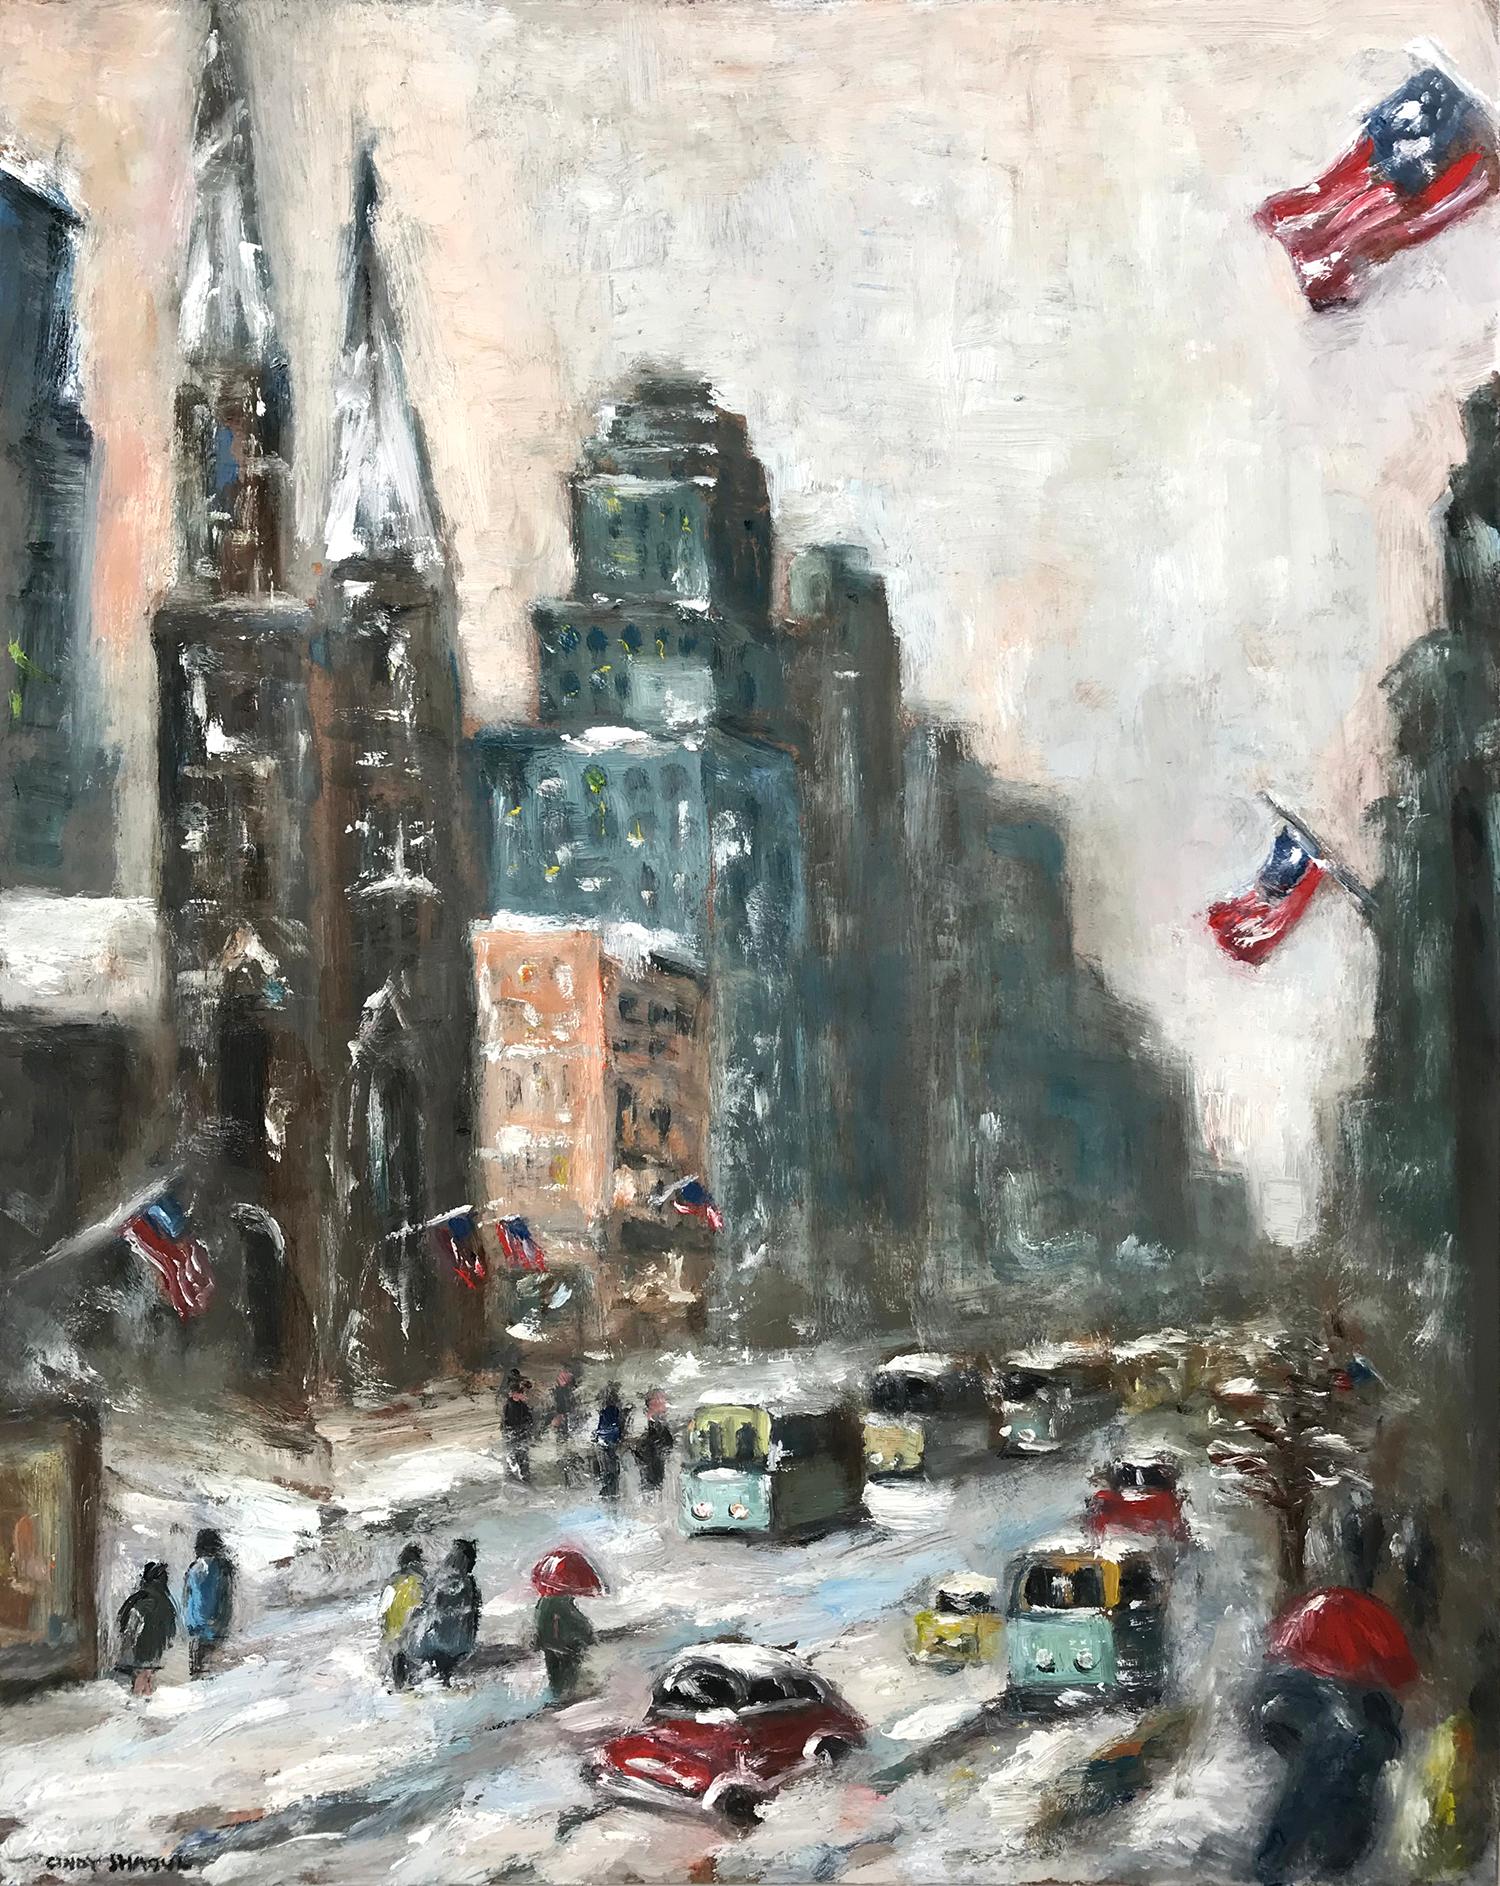 Snow in Downtown Wall Street, Impressionist Street Scene in style of Guy Wiggins - Painting by Cindy Shaoul